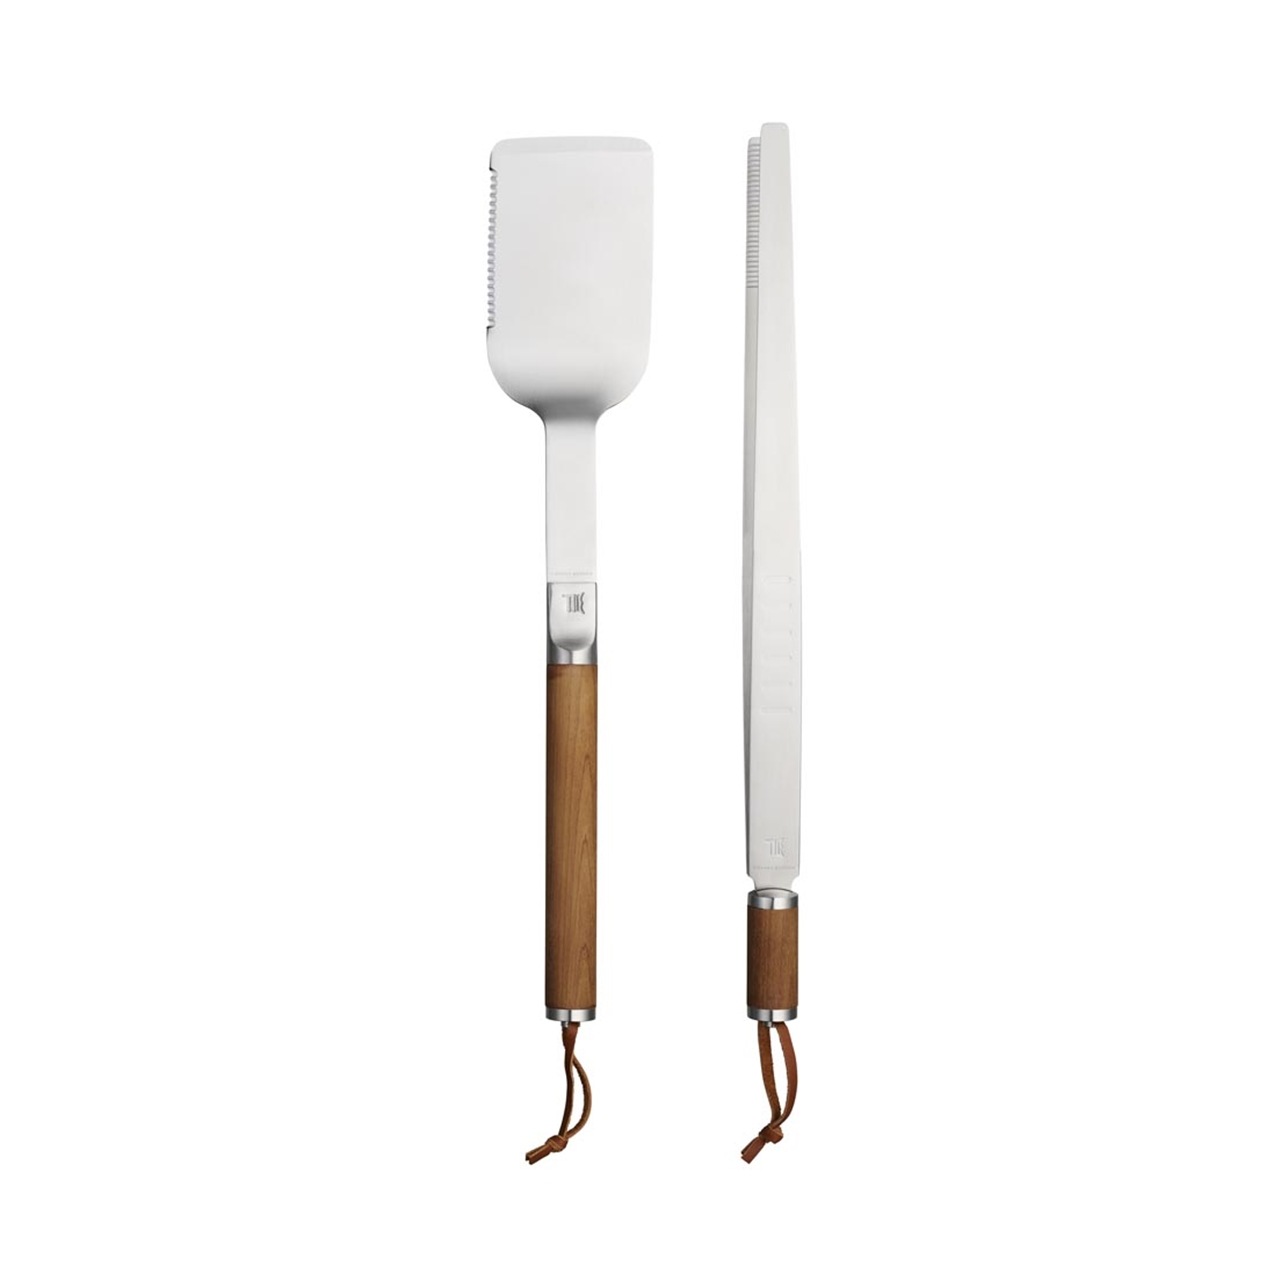 Norden Grill Chef Barbeque Utensils, 2 Pieces